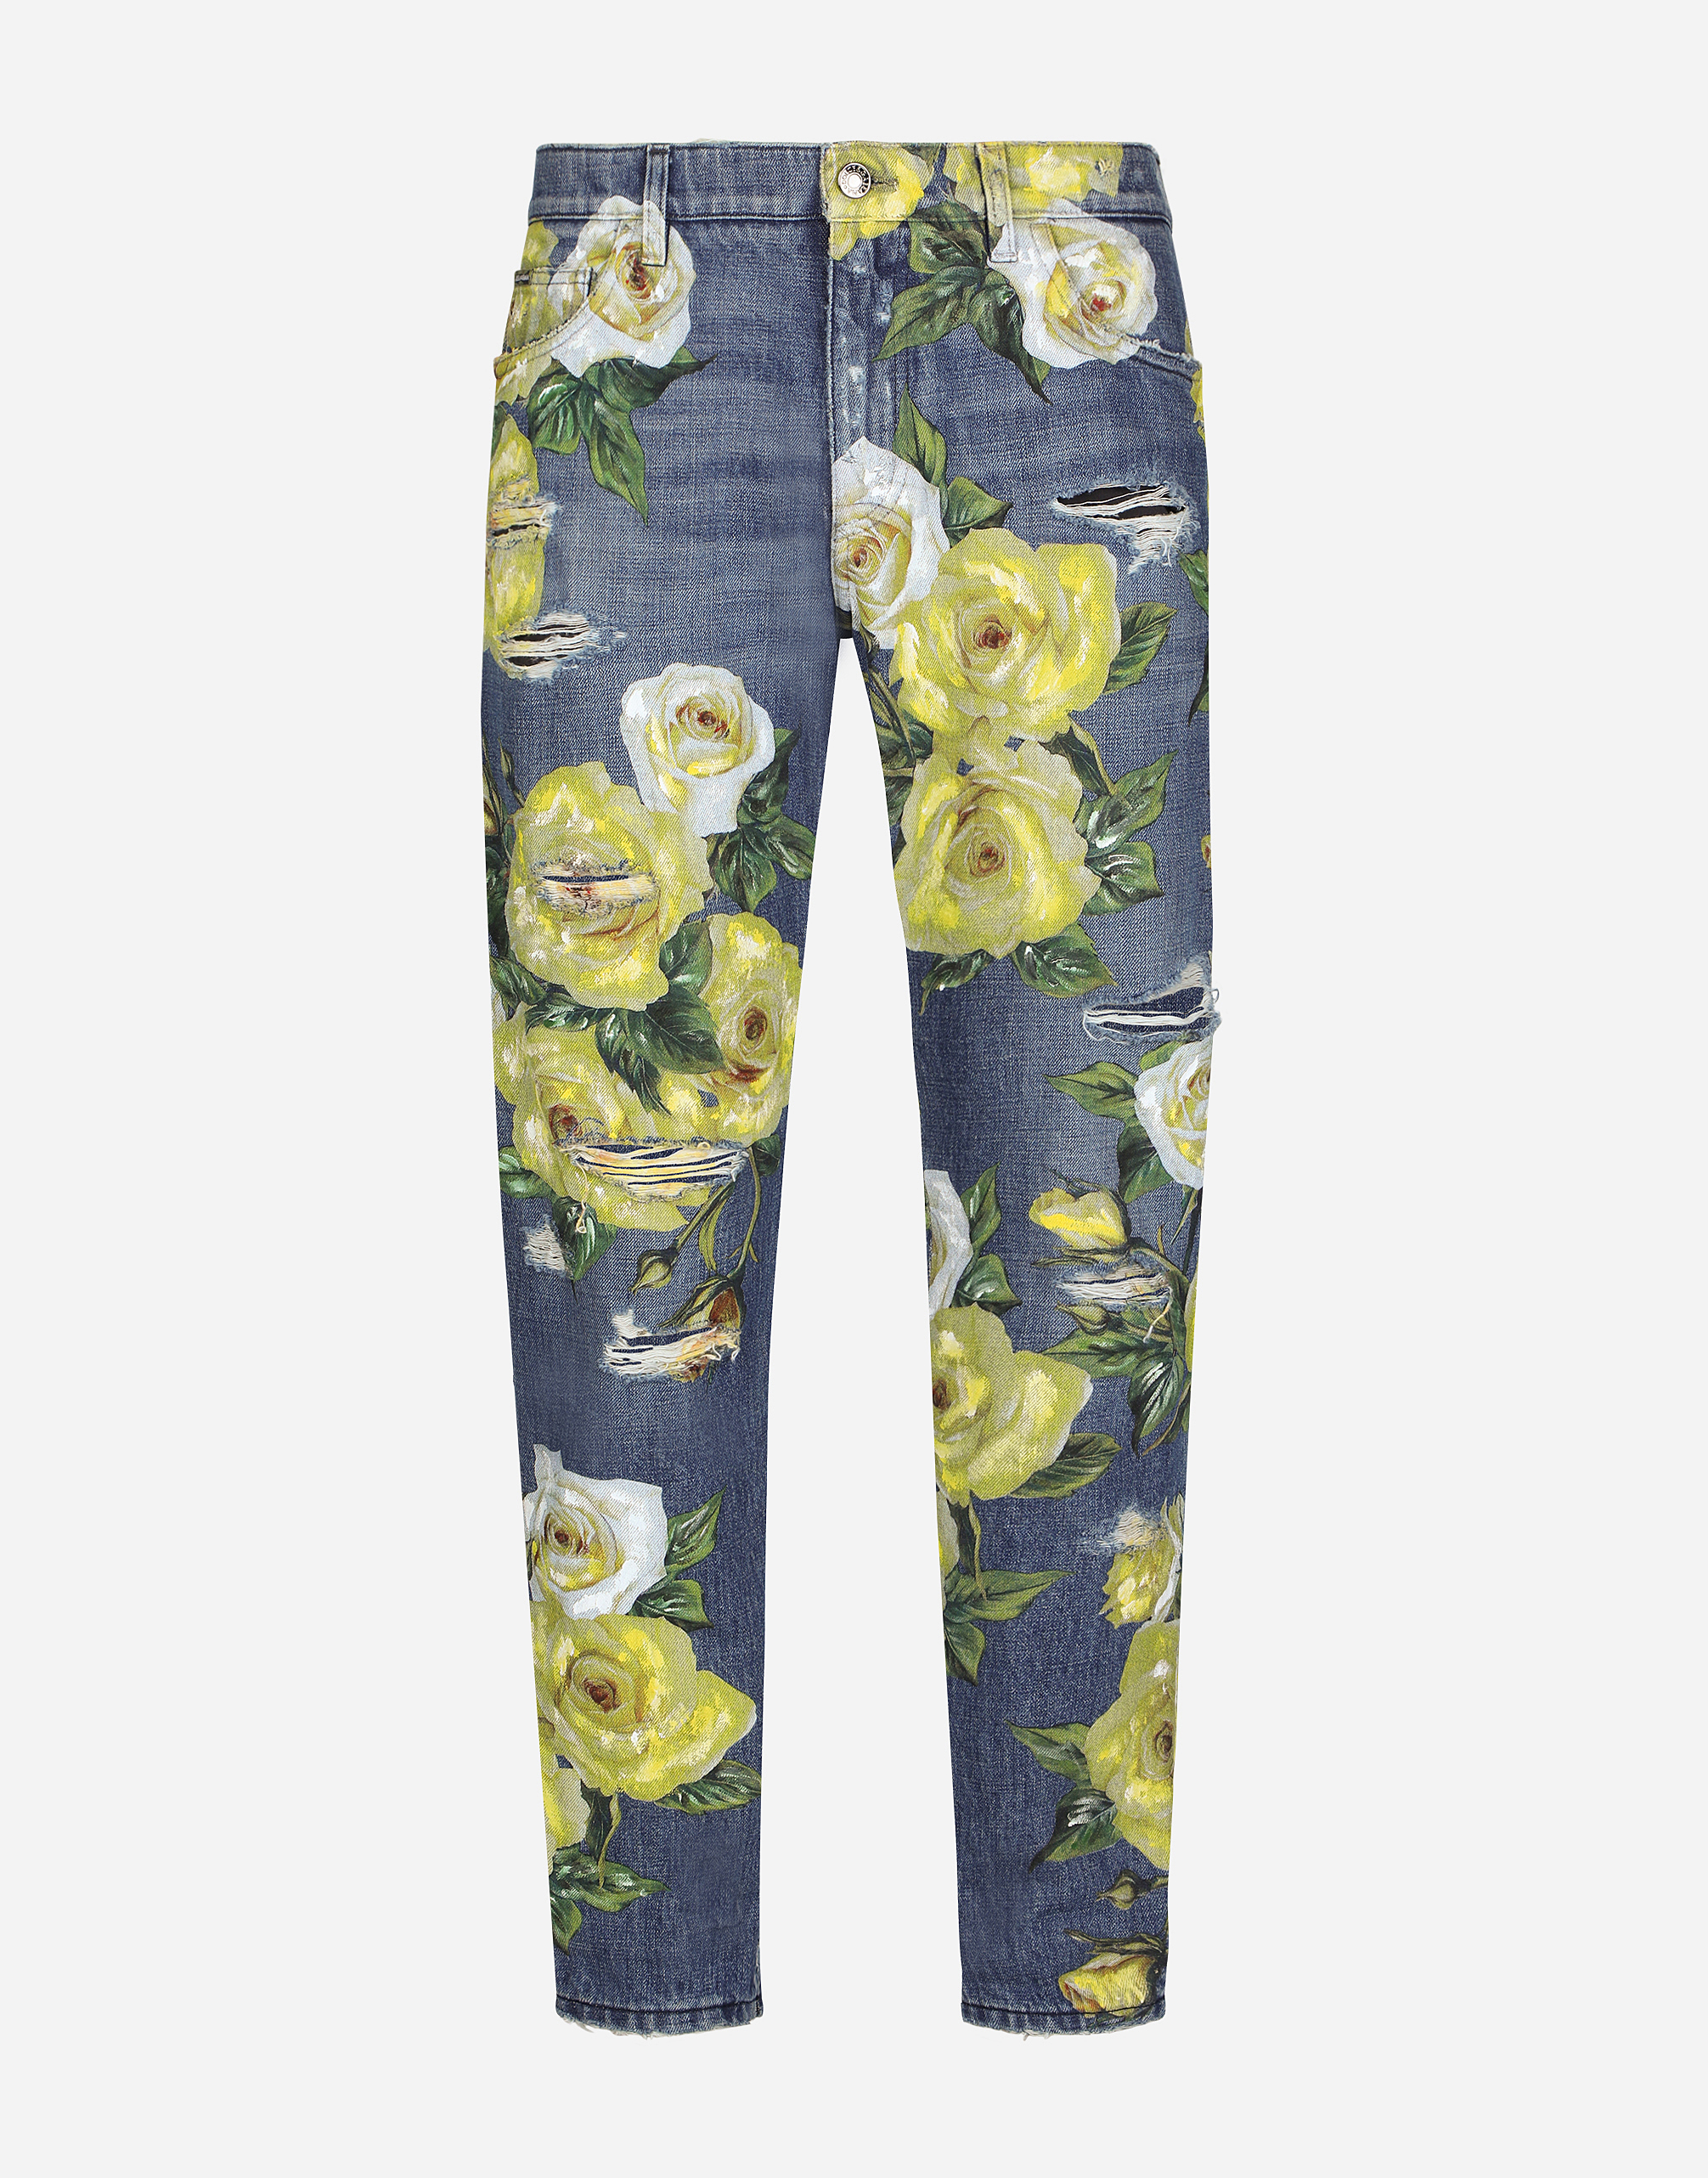 Loose blue denim jeans with all-over rose print in Multicolor